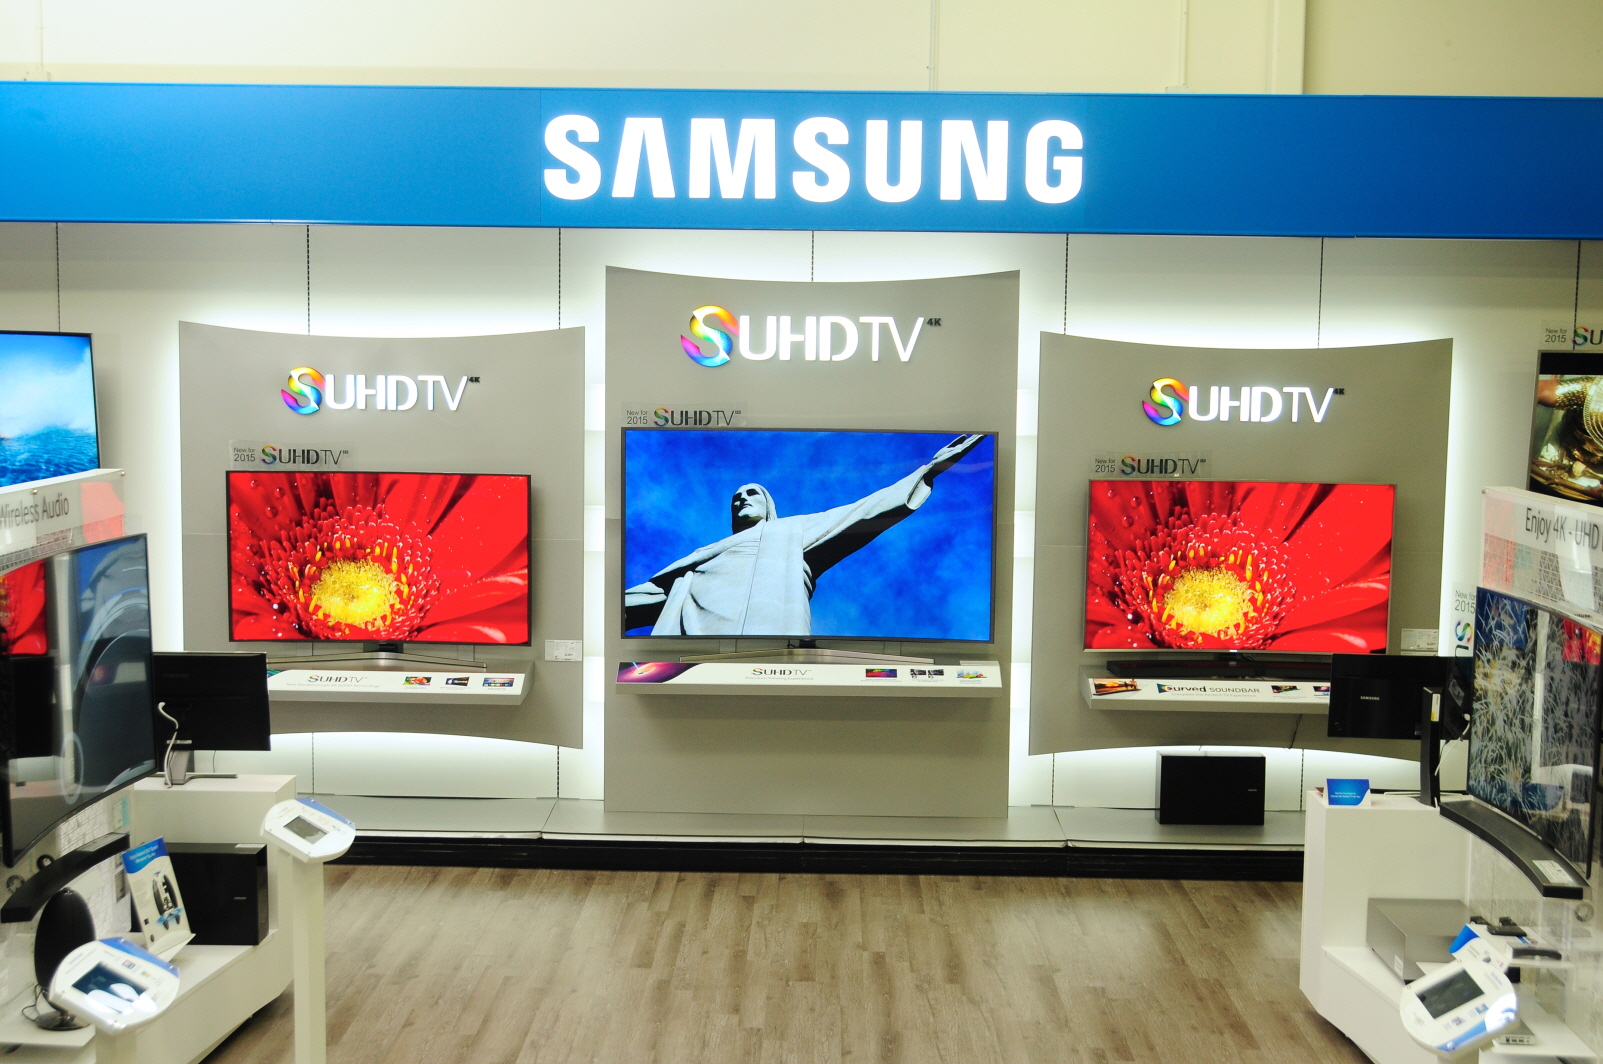 Samsung LCD TVs for Sale, Shop New & Used Samsung LCD TVs